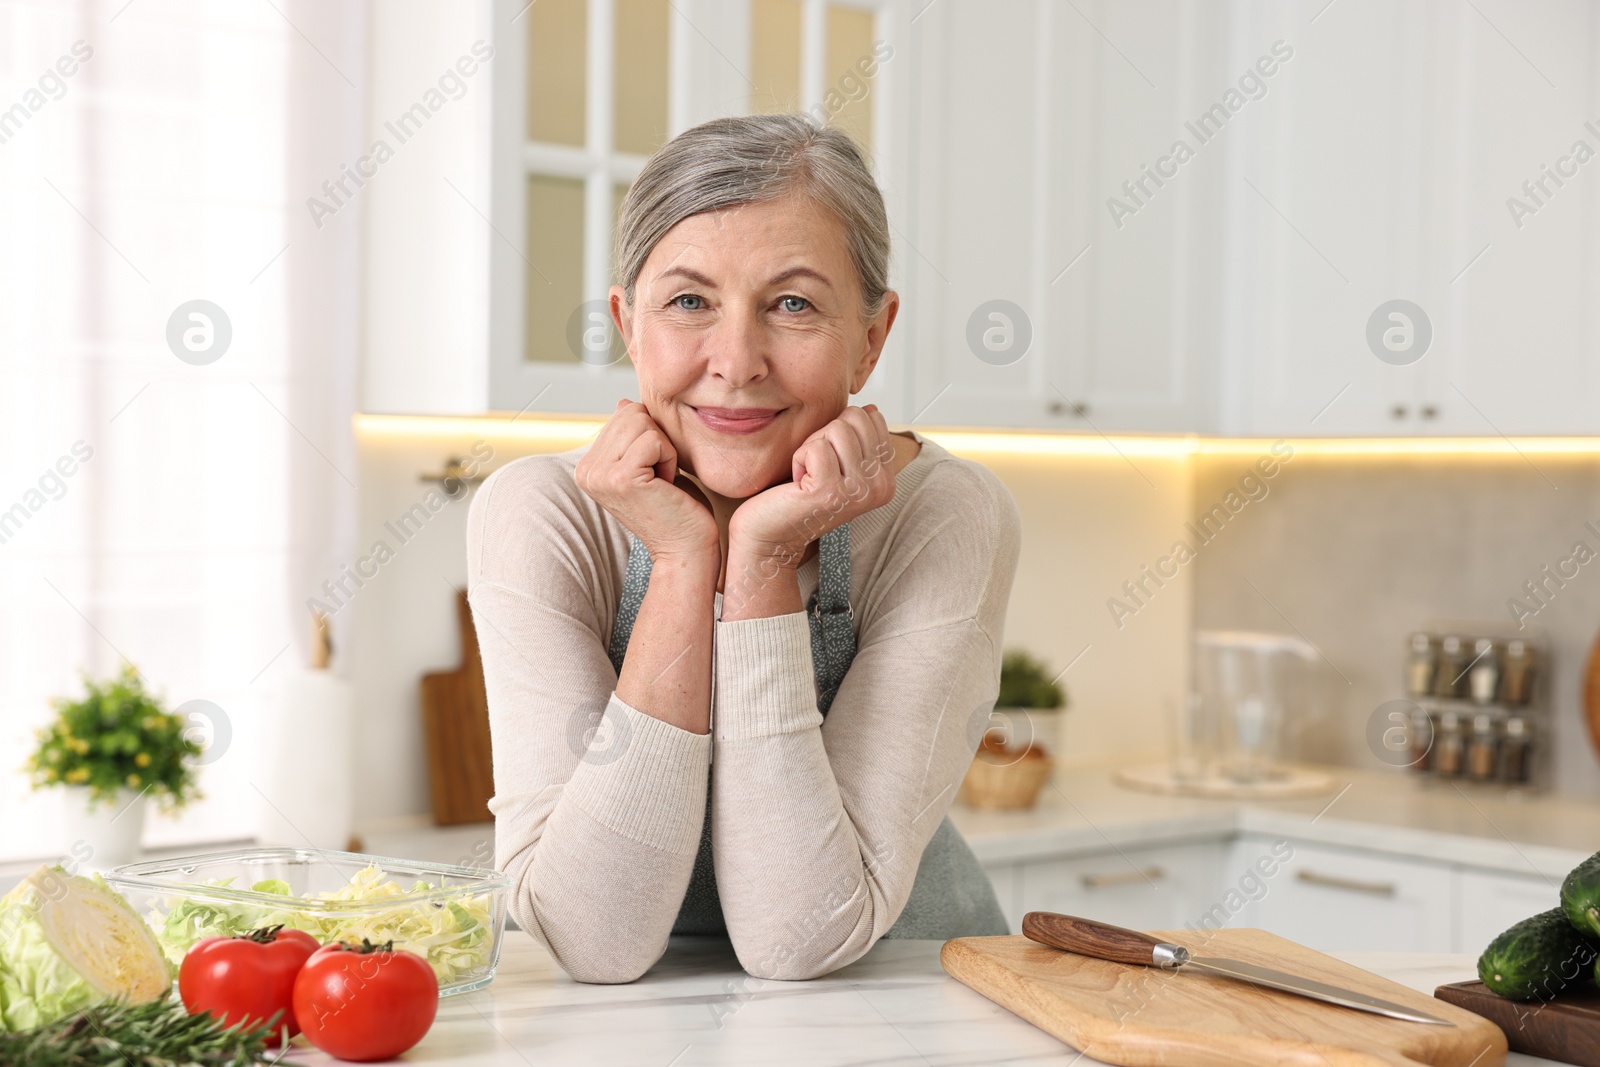 Photo of Happy housewife at white table in kitchen. Cooking process